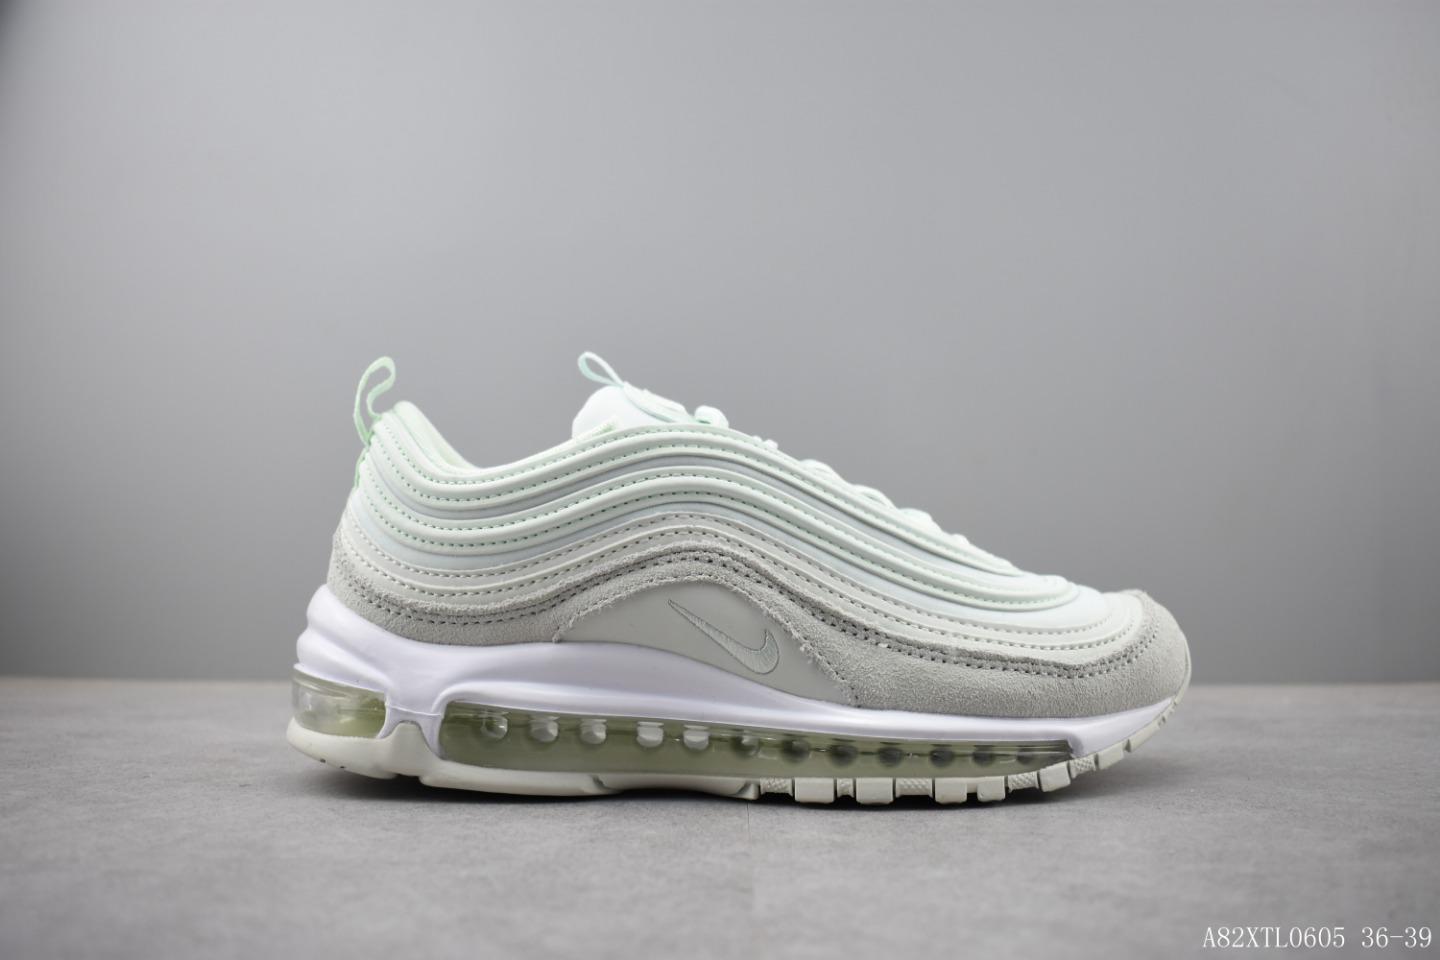 Mens Air max 97s size 9.5 in Sherwood, Nottinghamshire